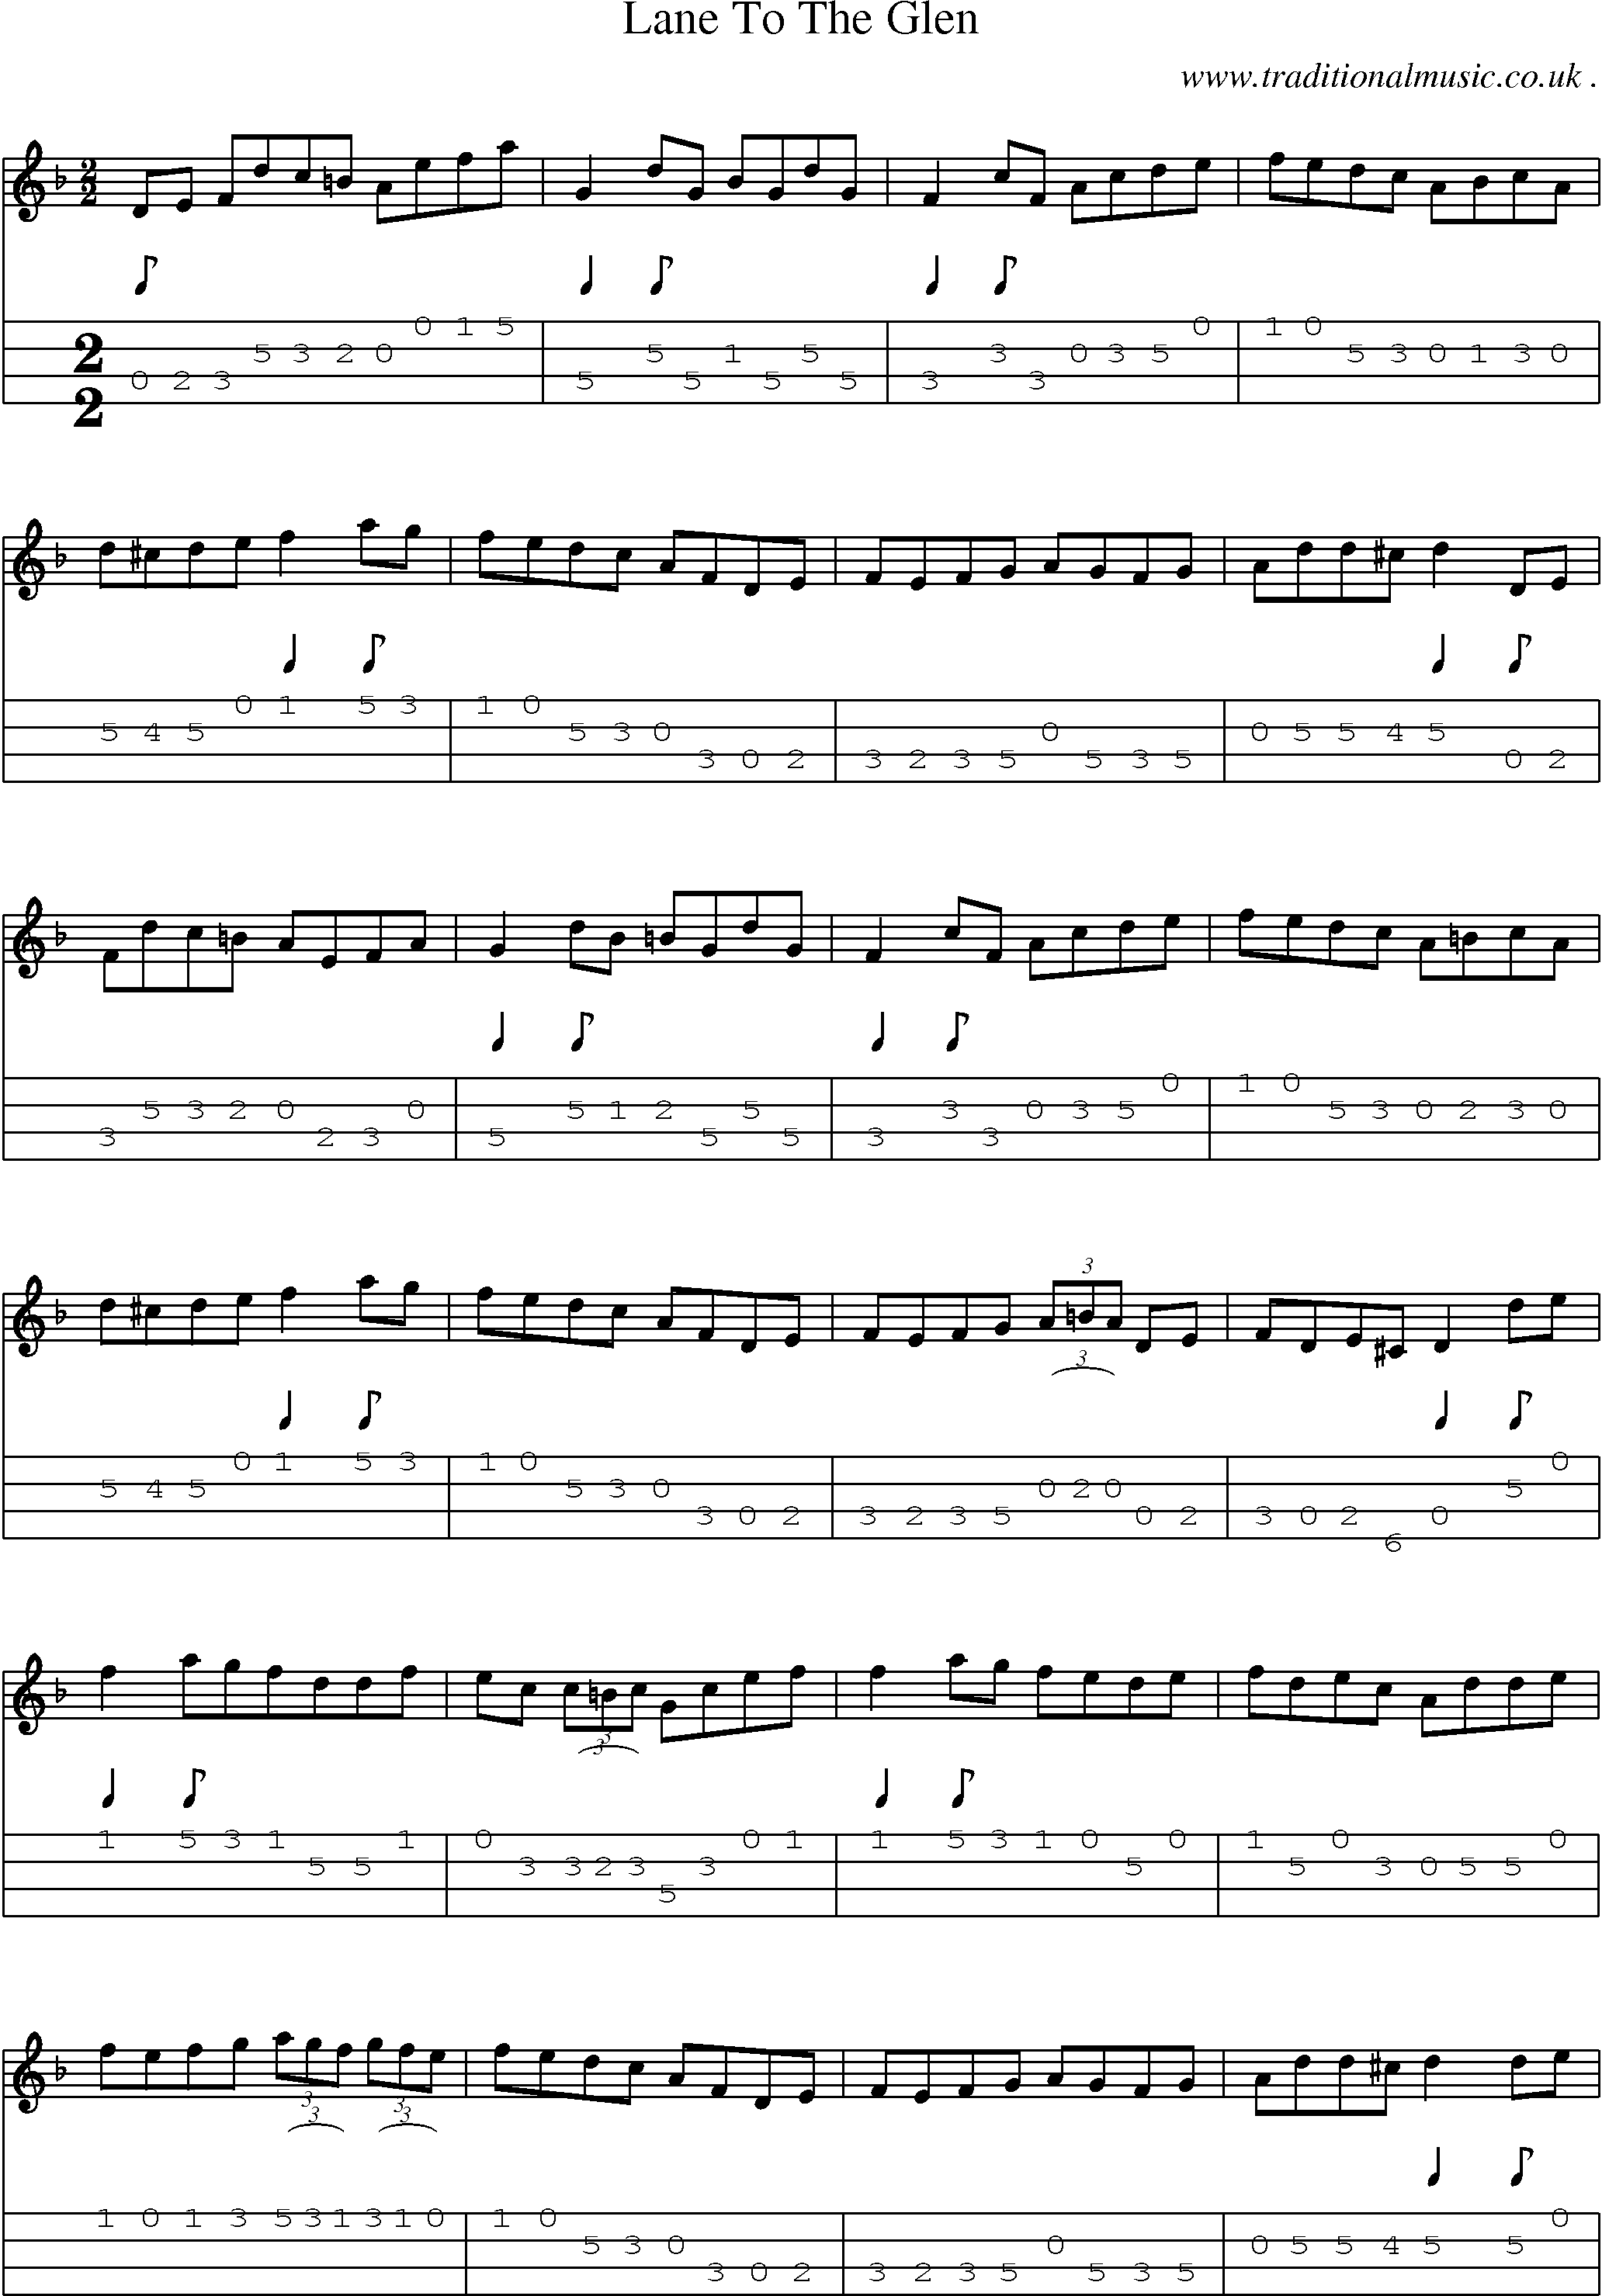 Sheet-Music and Mandolin Tabs for Lane To The Glen